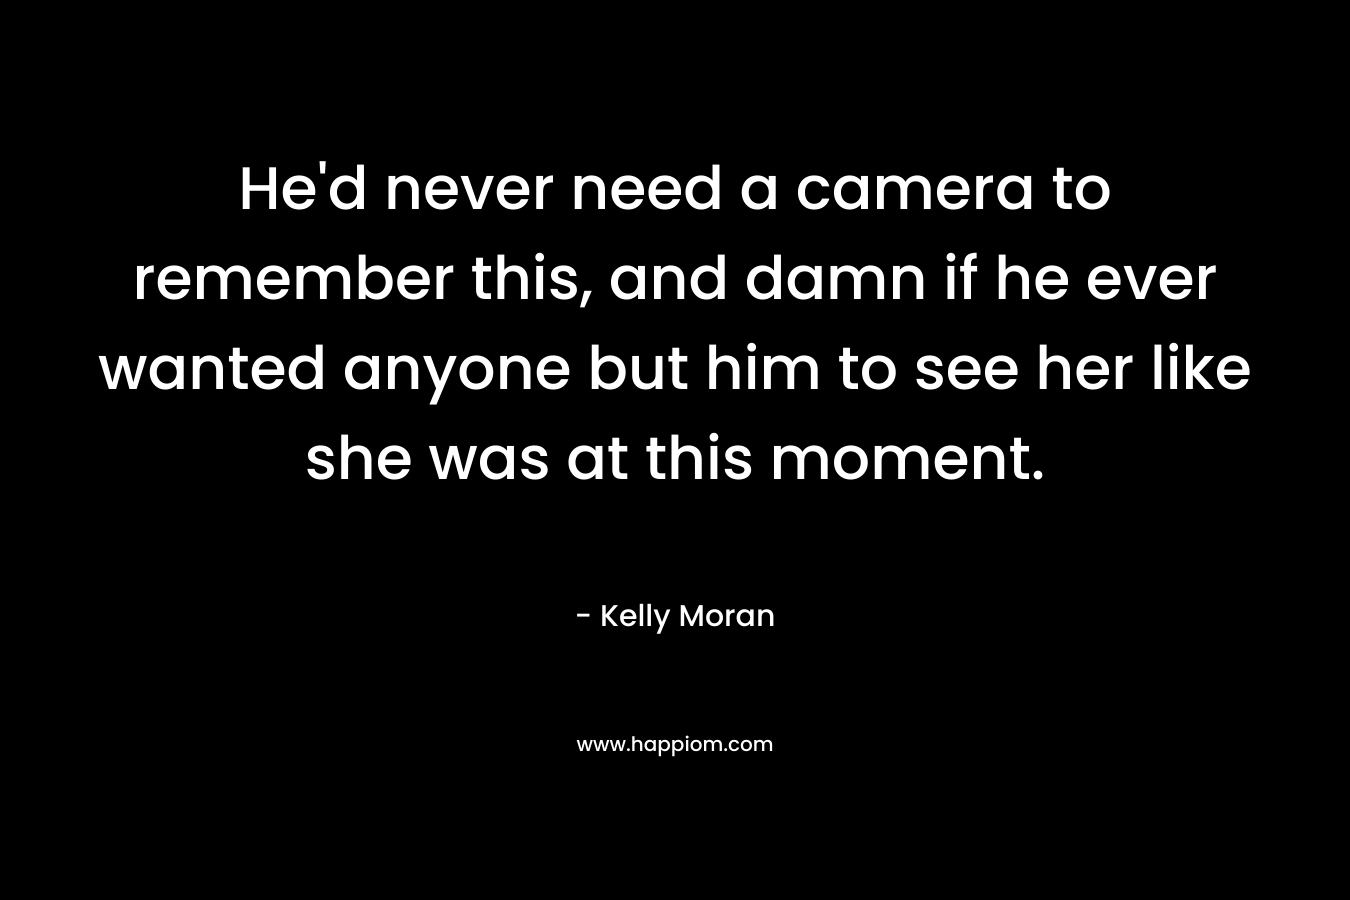 He'd never need a camera to remember this, and damn if he ever wanted anyone but him to see her like she was at this moment.